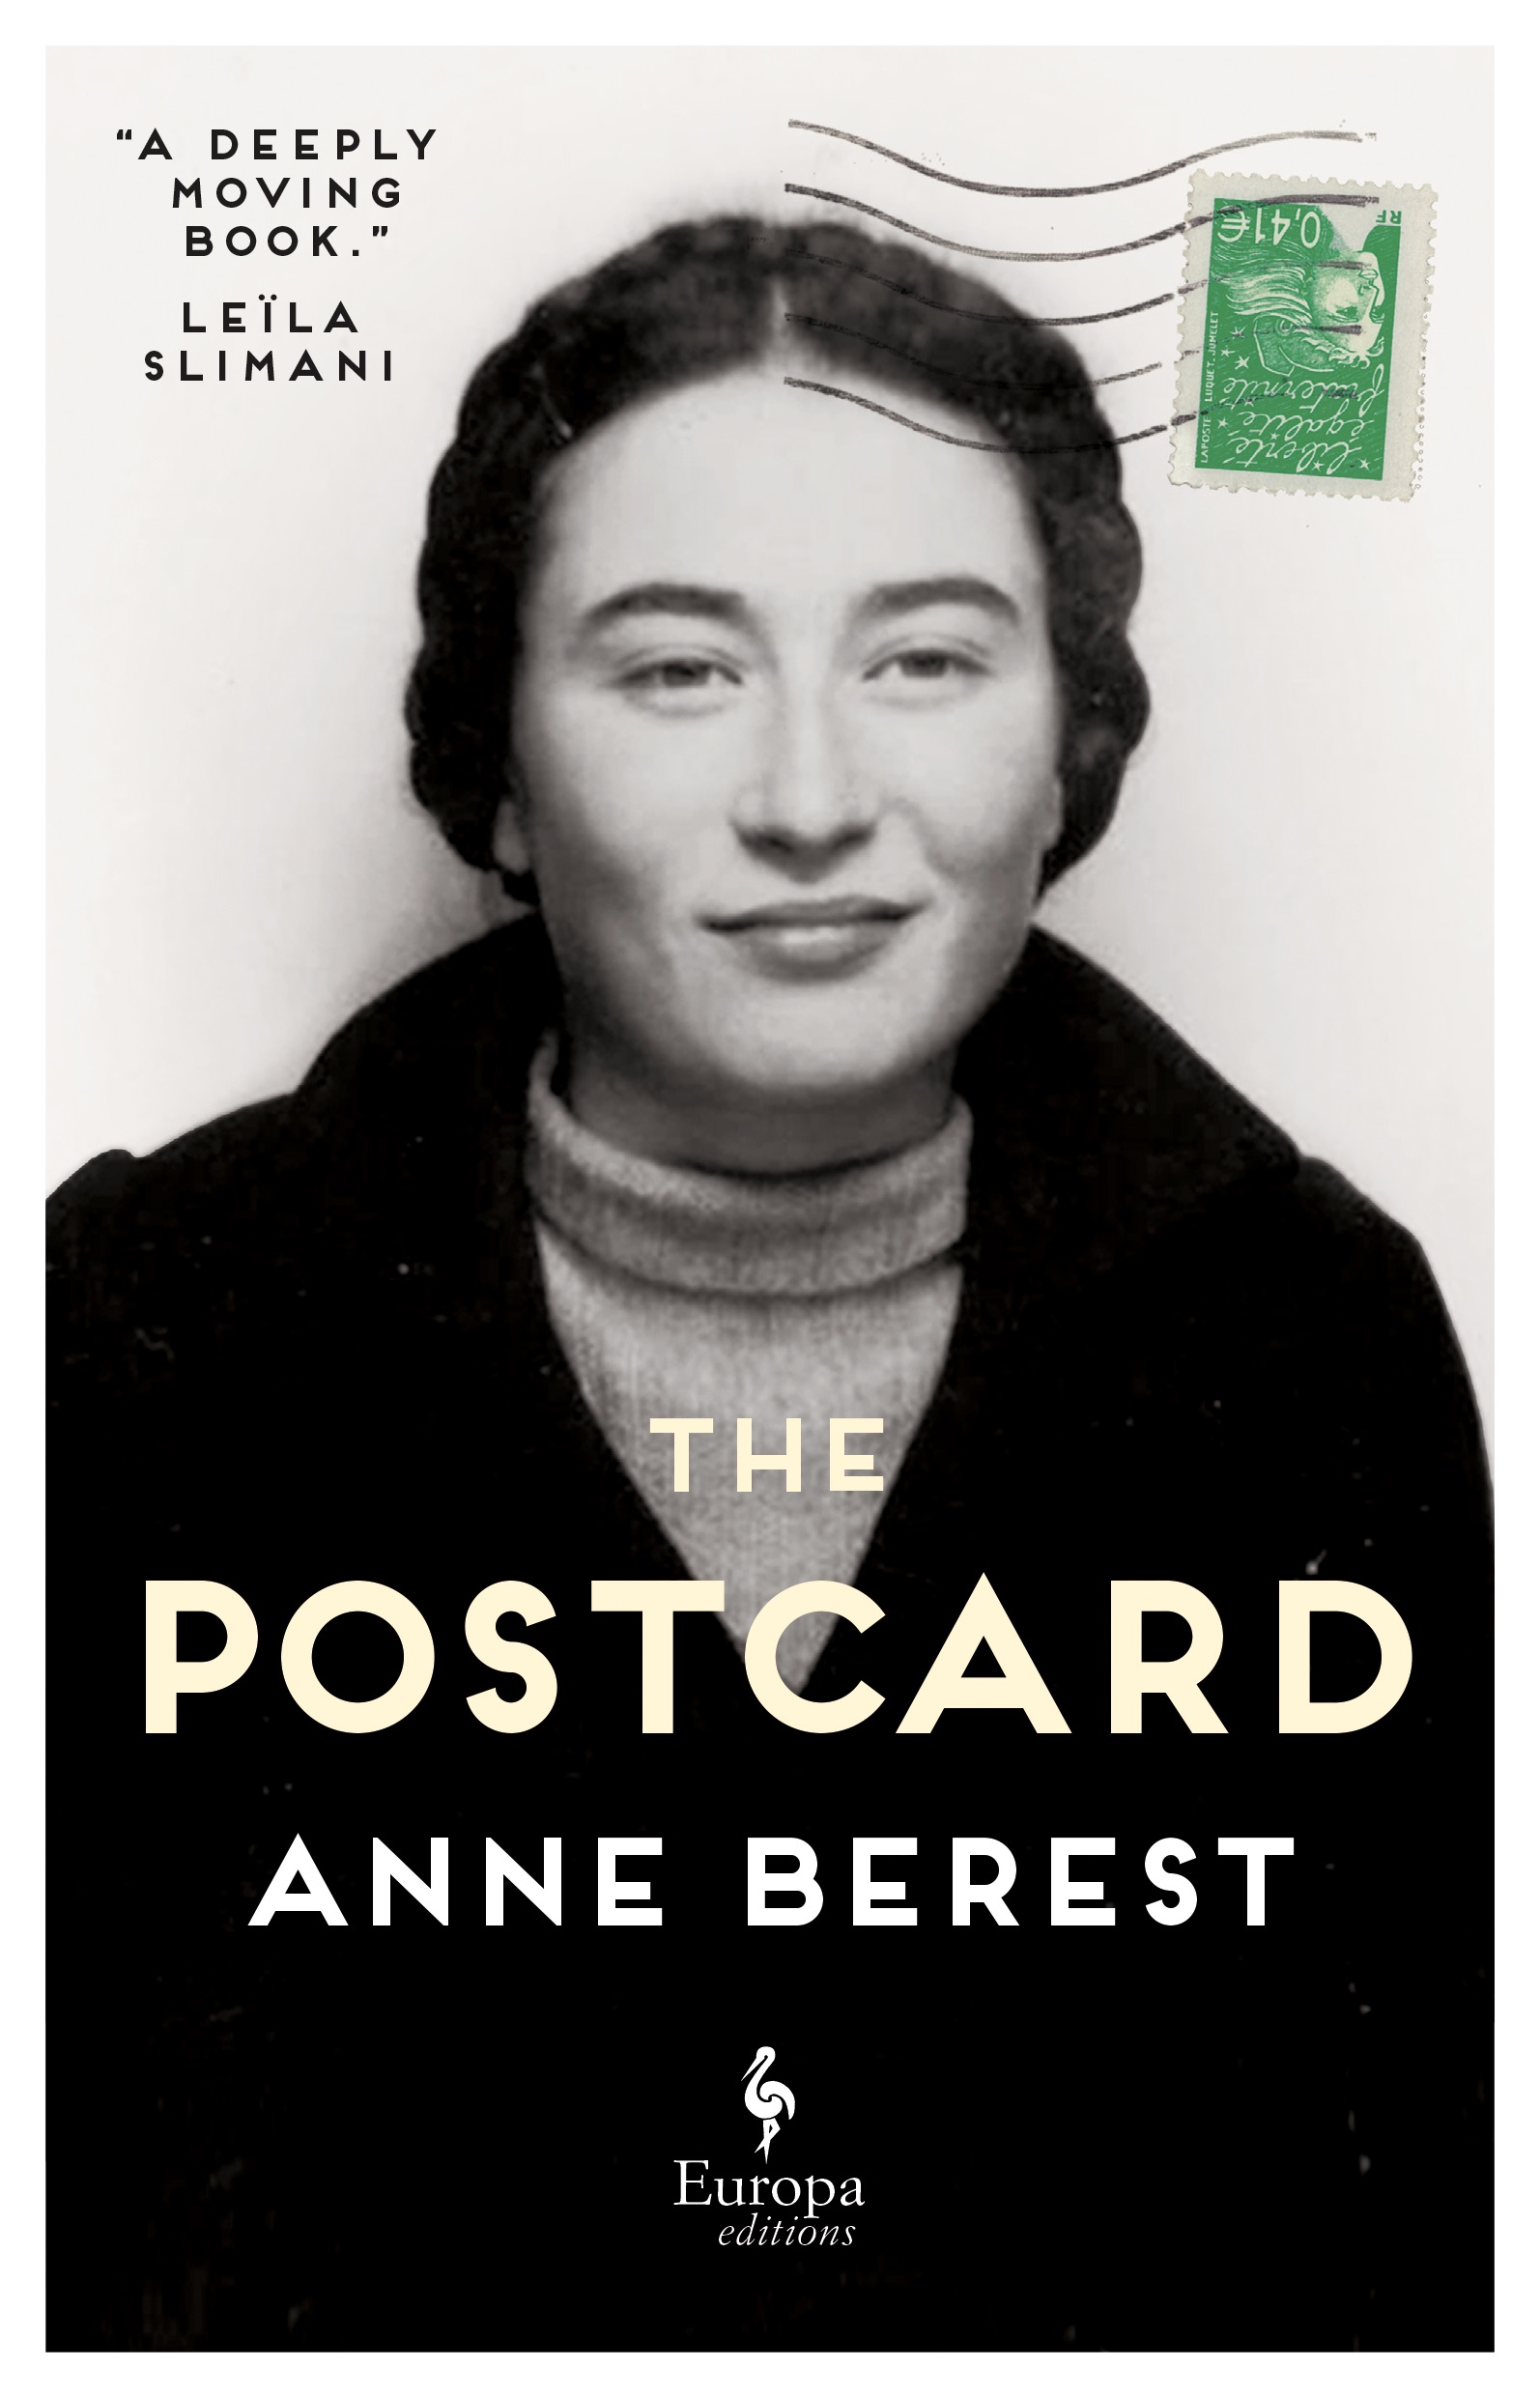 The Postcard, Anne Berest book cover